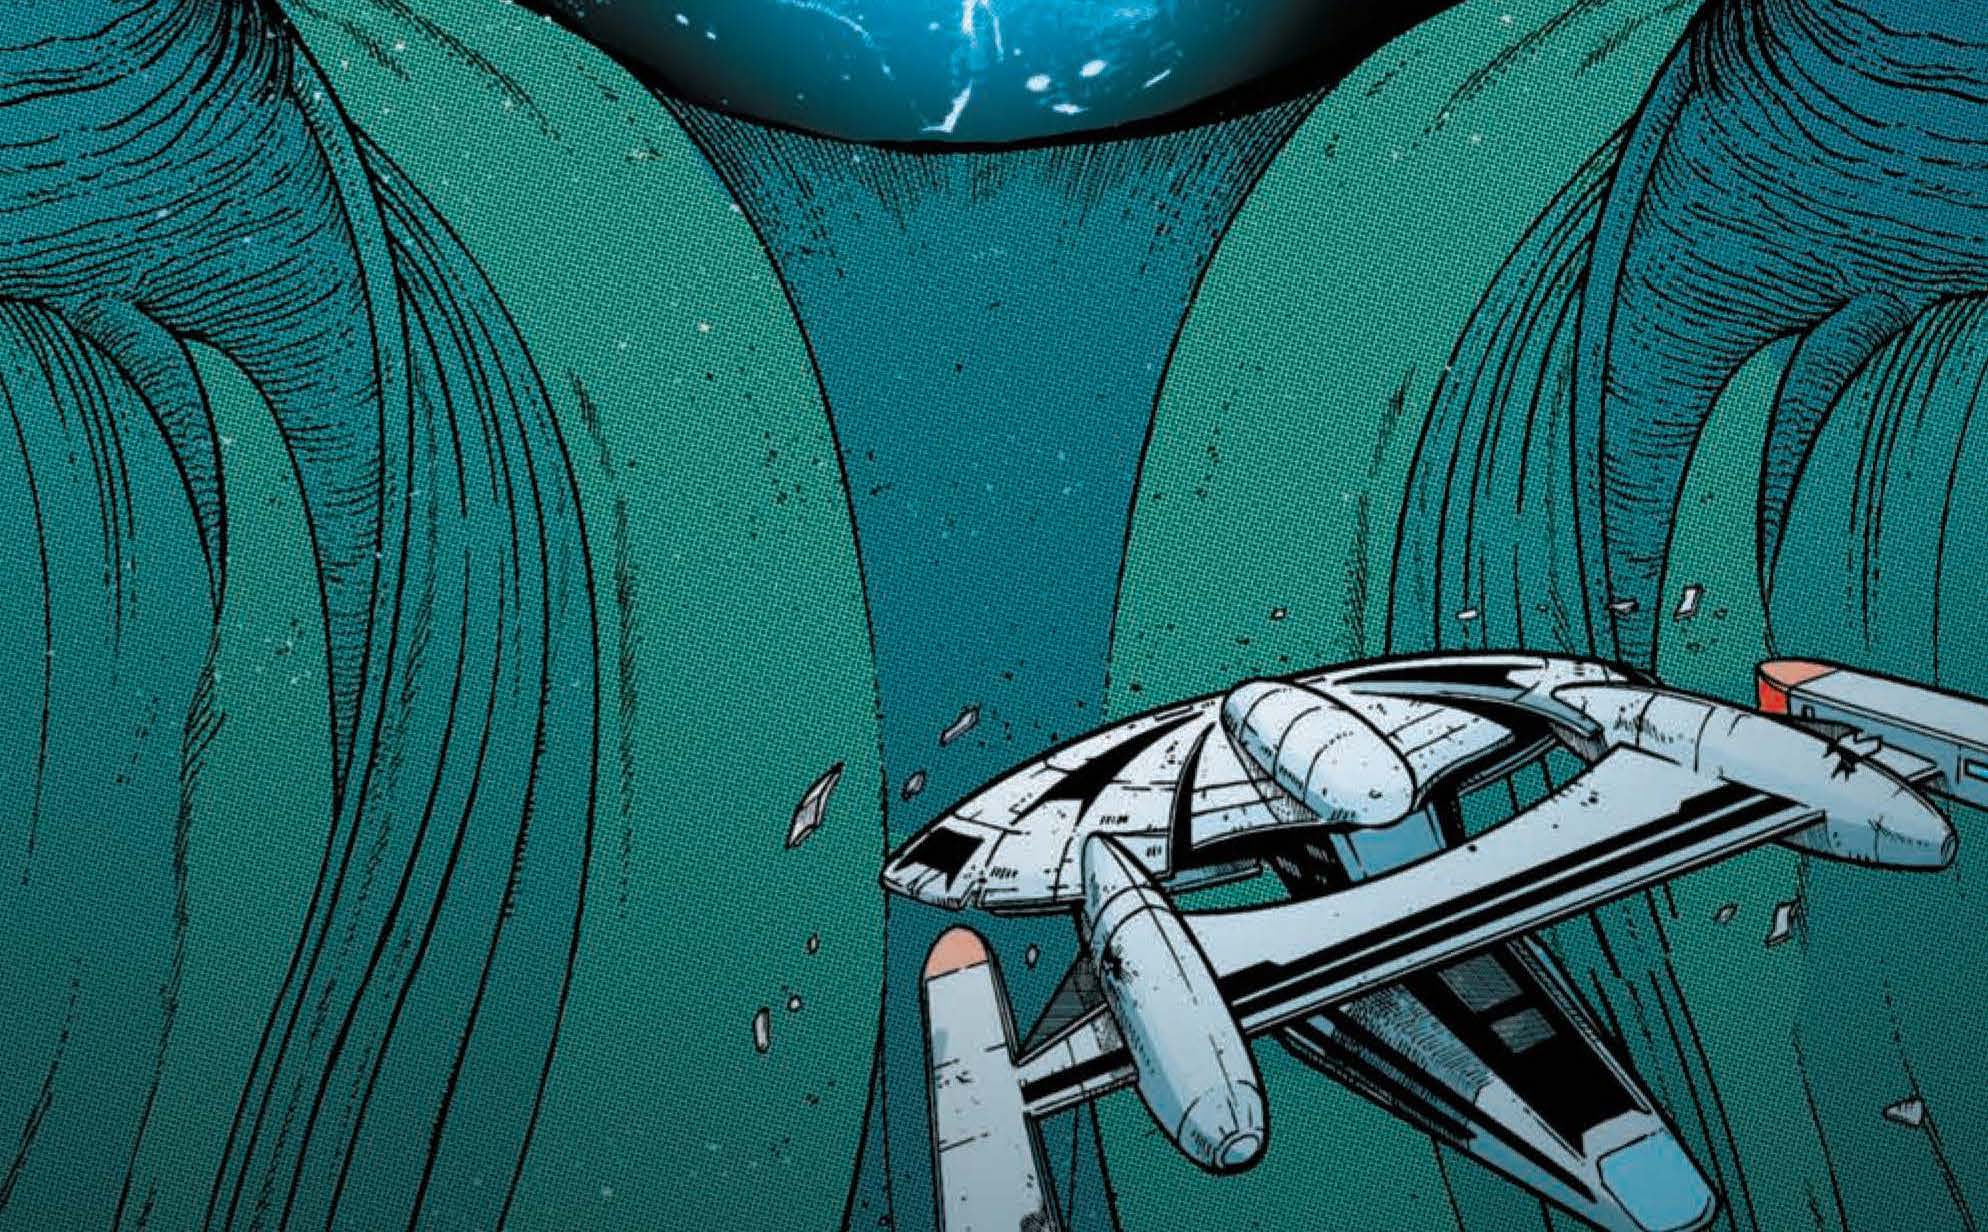 'Star Trek' #6 concludes its pulse-pounding first story arc